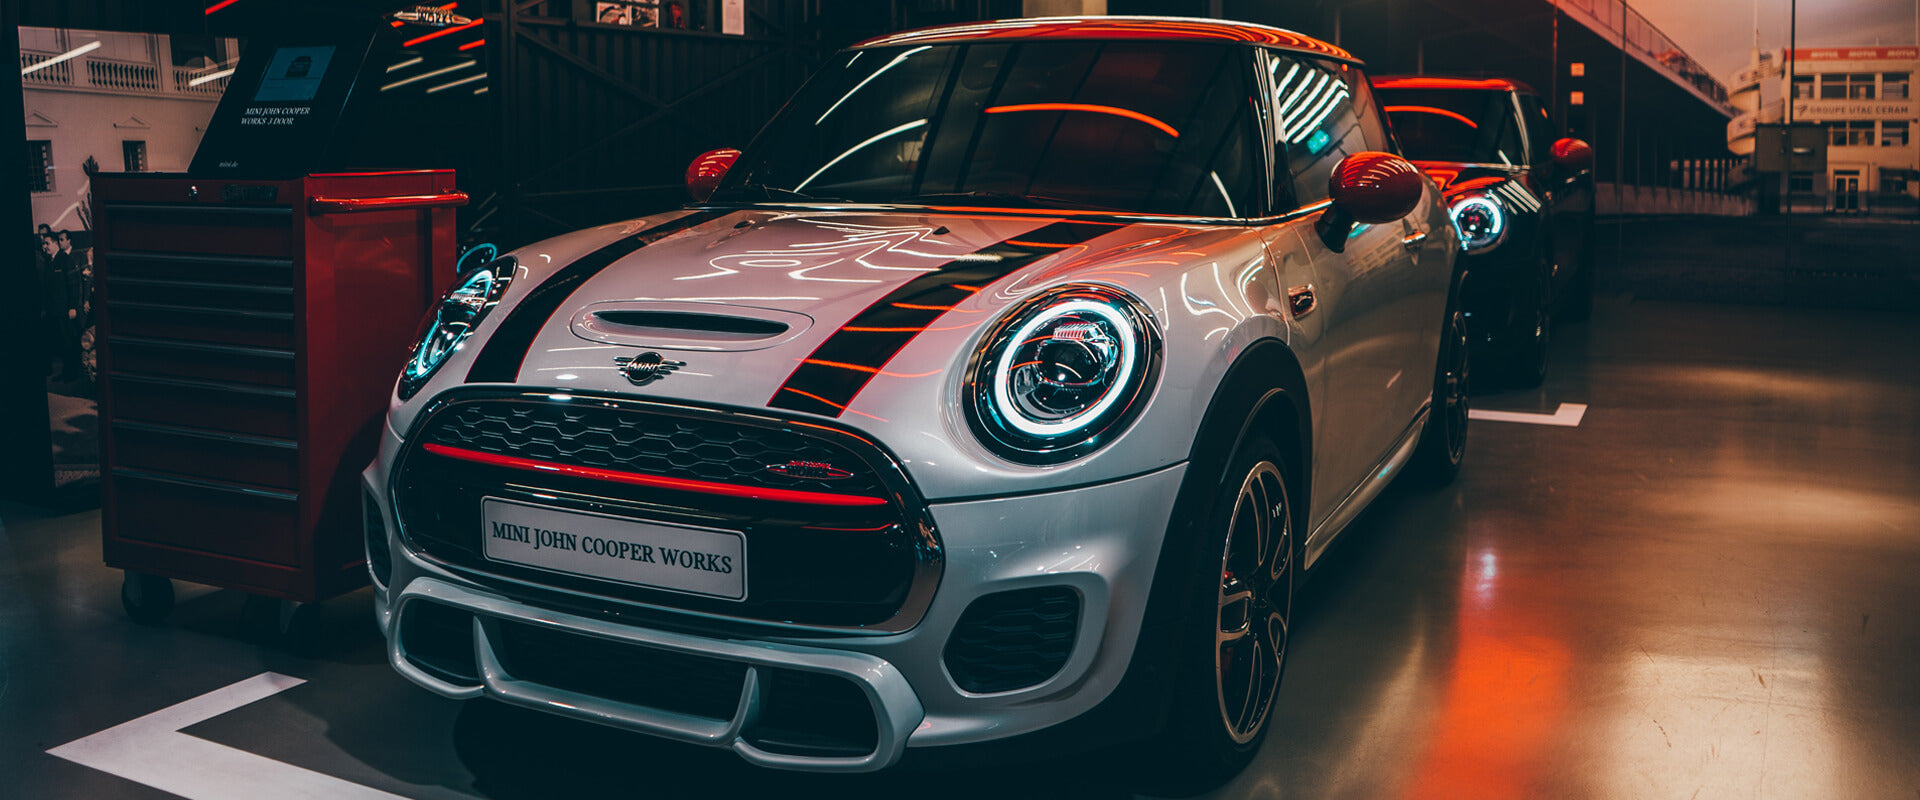 The Coolest MINI Cooper Accessories and Aftermarket Parts Online Shop!